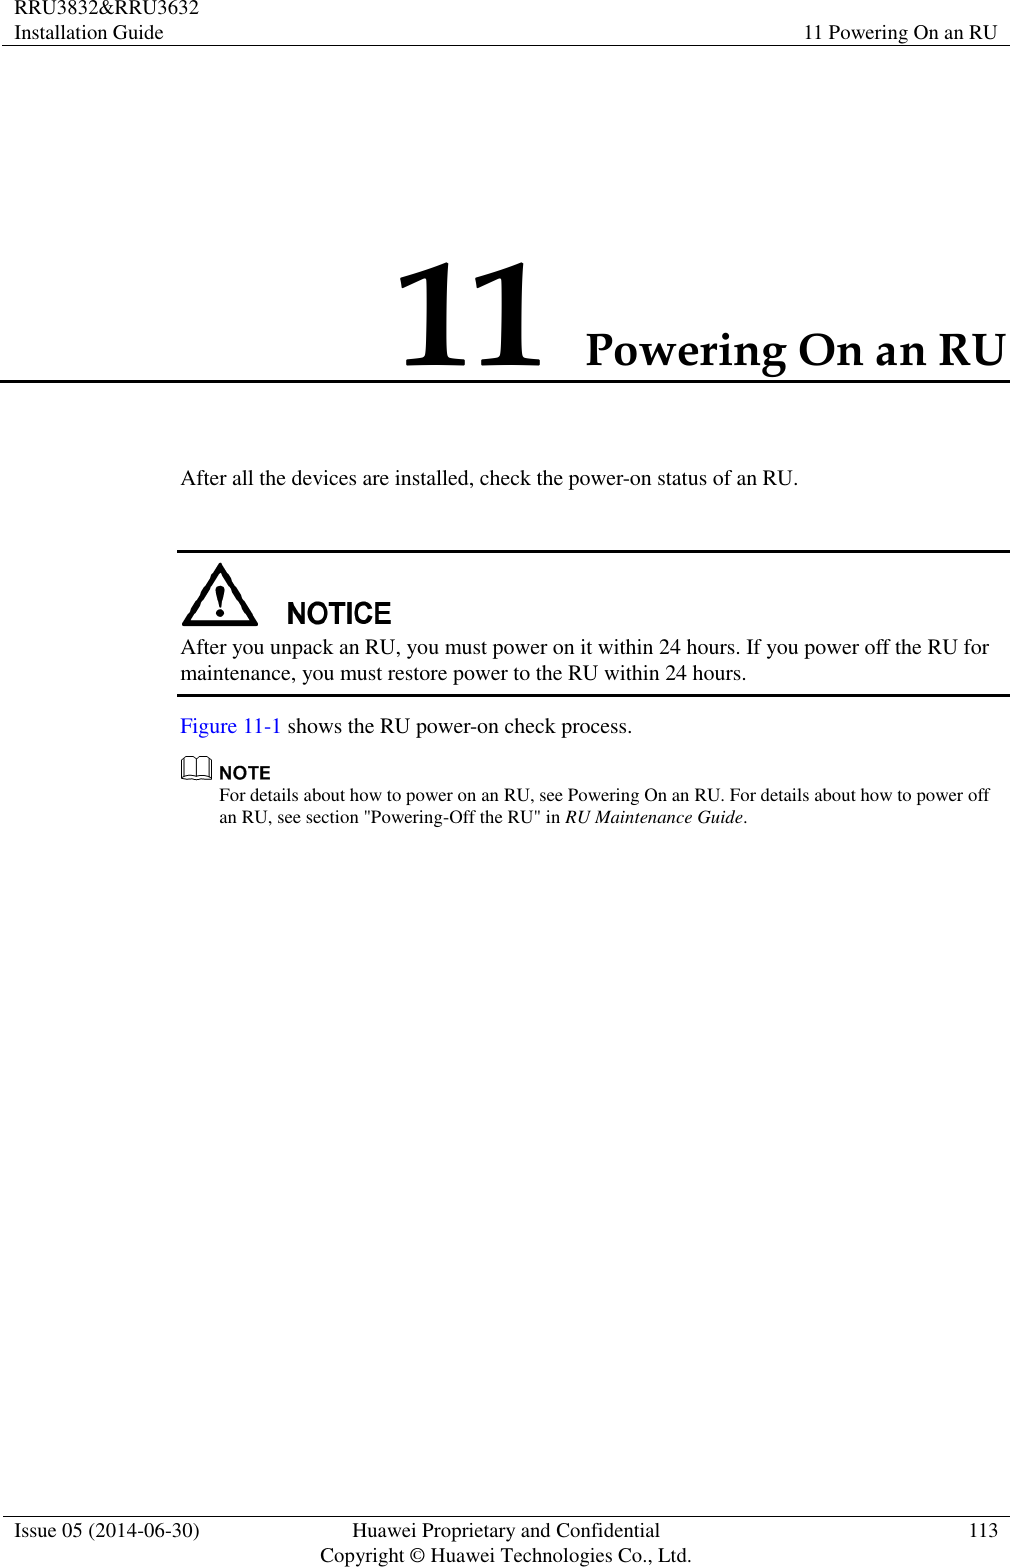 RRU3832&amp;RRU3632 Installation Guide 11 Powering On an RU  Issue 05 (2014-06-30) Huawei Proprietary and Confidential                                     Copyright © Huawei Technologies Co., Ltd. 113  11 Powering On an RU After all the devices are installed, check the power-on status of an RU.   After you unpack an RU, you must power on it within 24 hours. If you power off the RU for maintenance, you must restore power to the RU within 24 hours. Figure 11-1 shows the RU power-on check process.  For details about how to power on an RU, see Powering On an RU. For details about how to power off an RU, see section &quot;Powering-Off the RU&quot; in RU Maintenance Guide. 